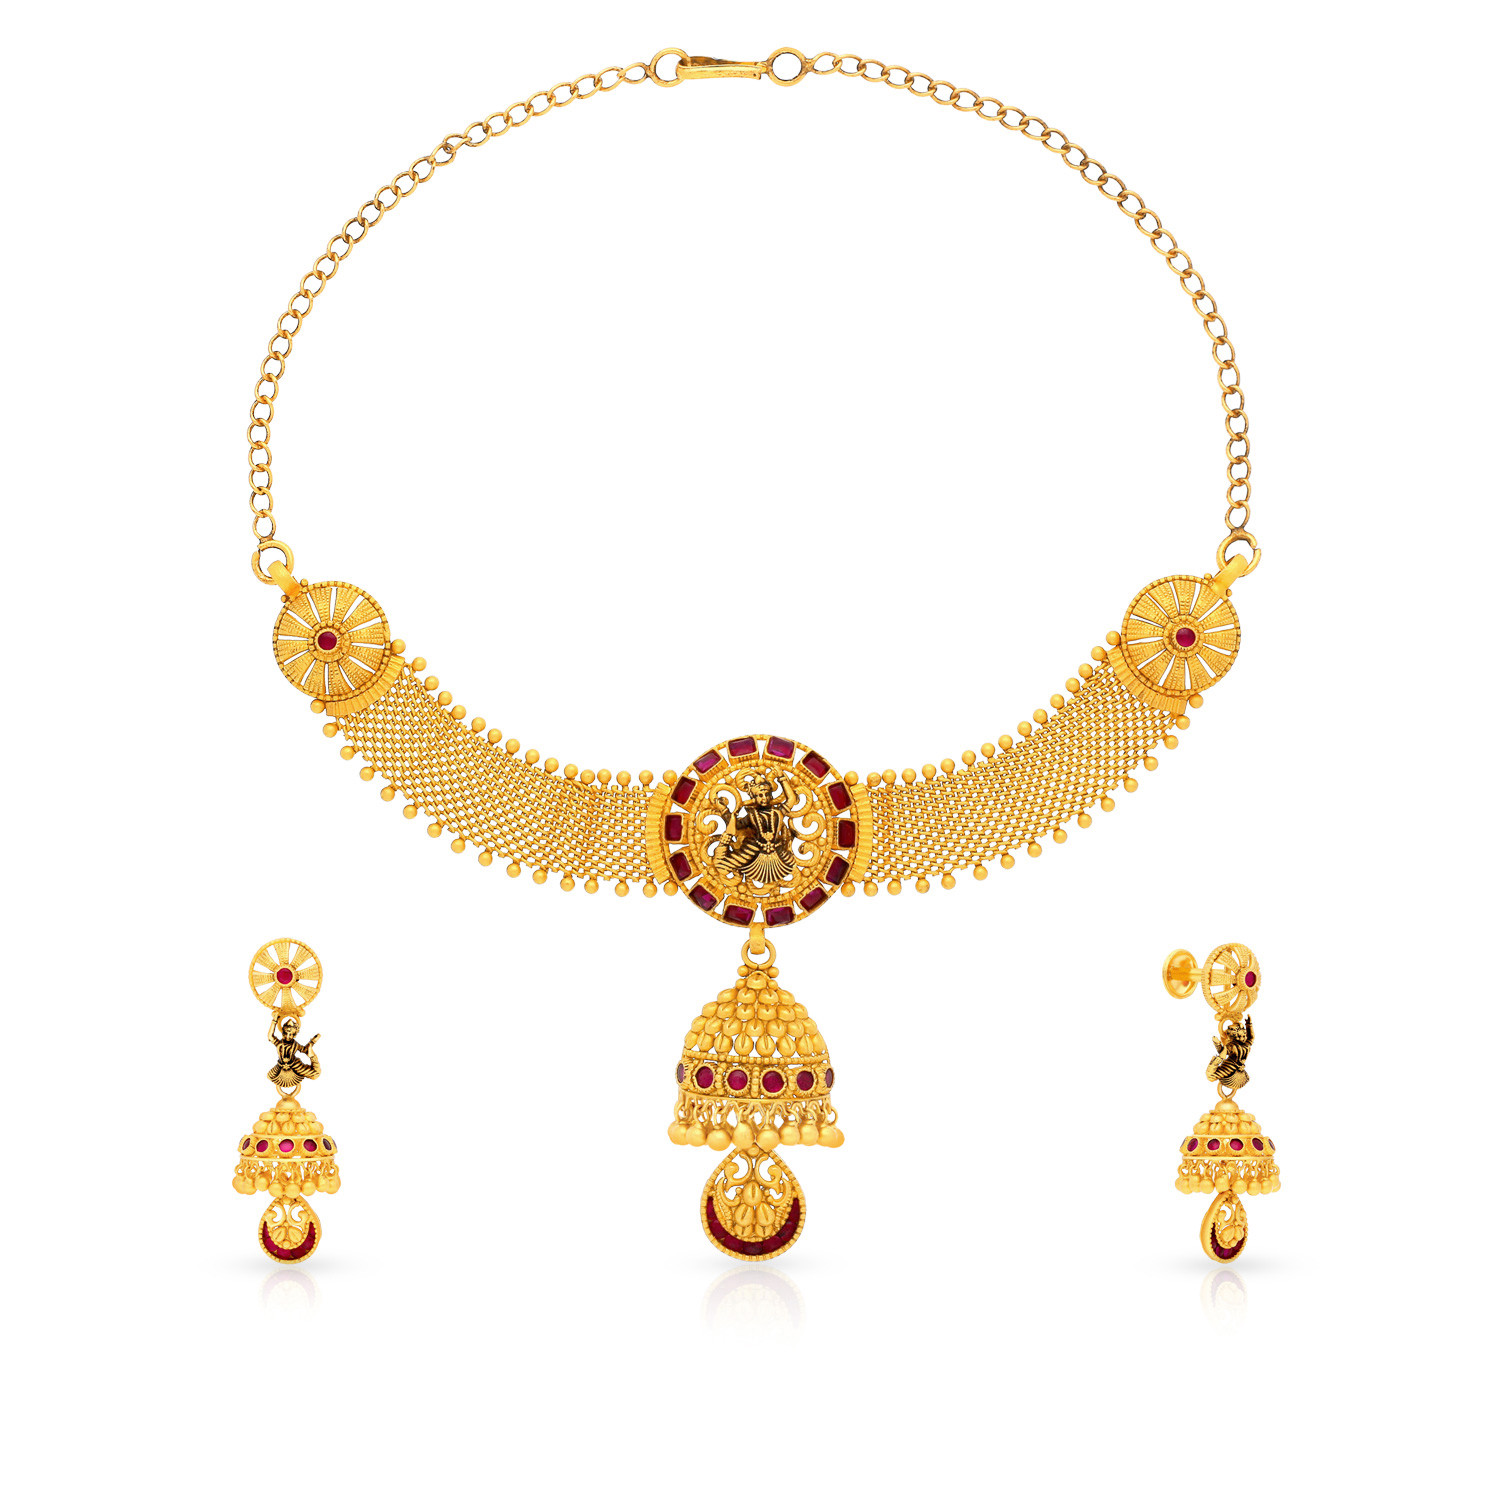 Divine Gold Necklace Set NSUSNKNTA10080